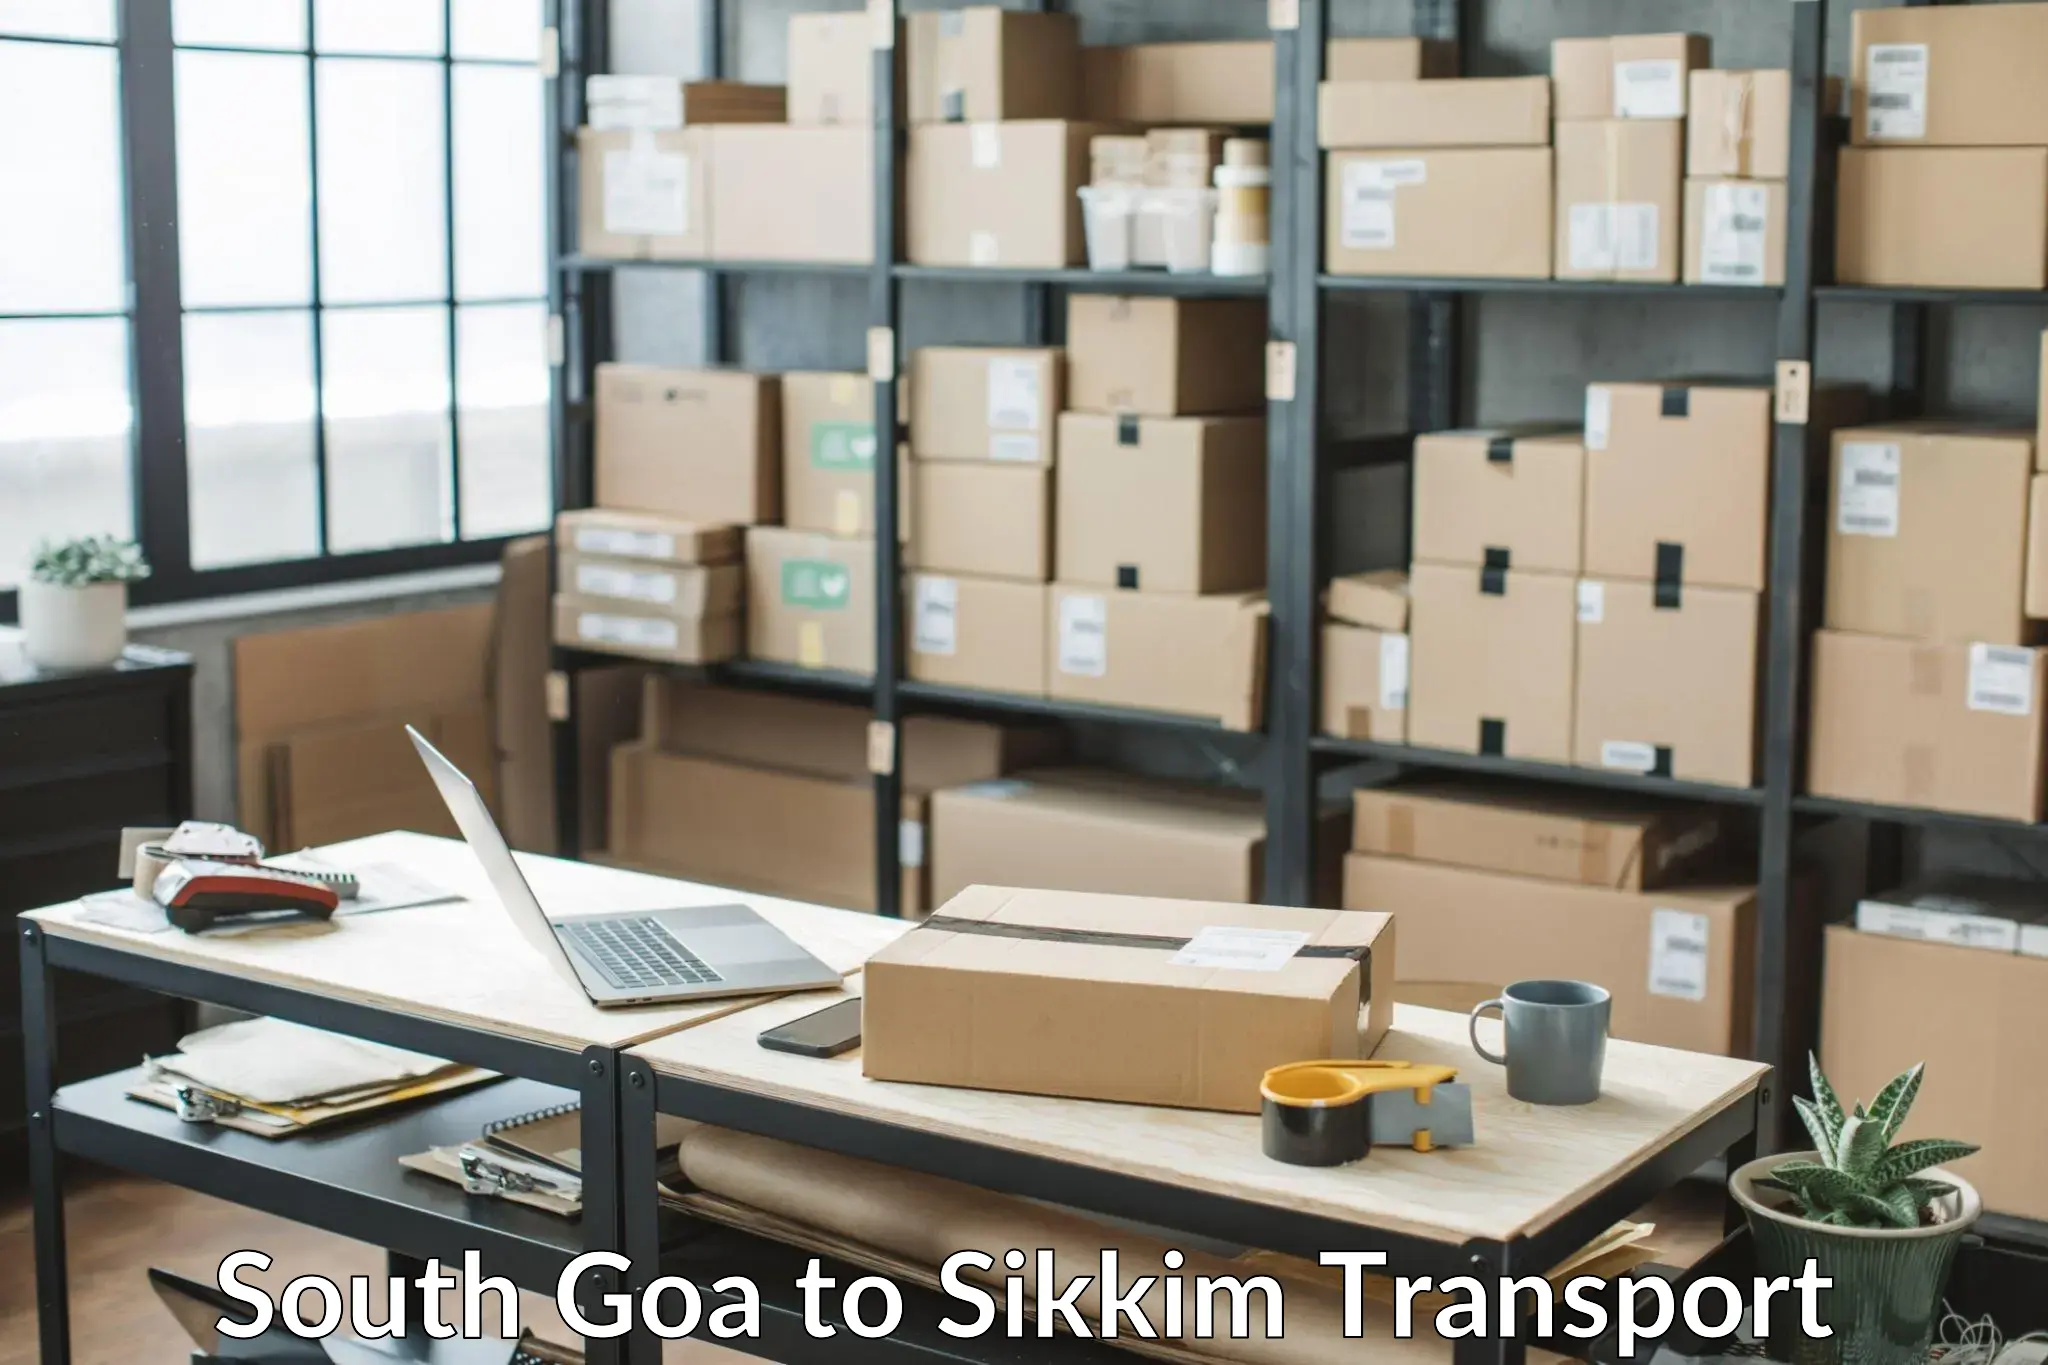 Lorry transport service South Goa to South Sikkim